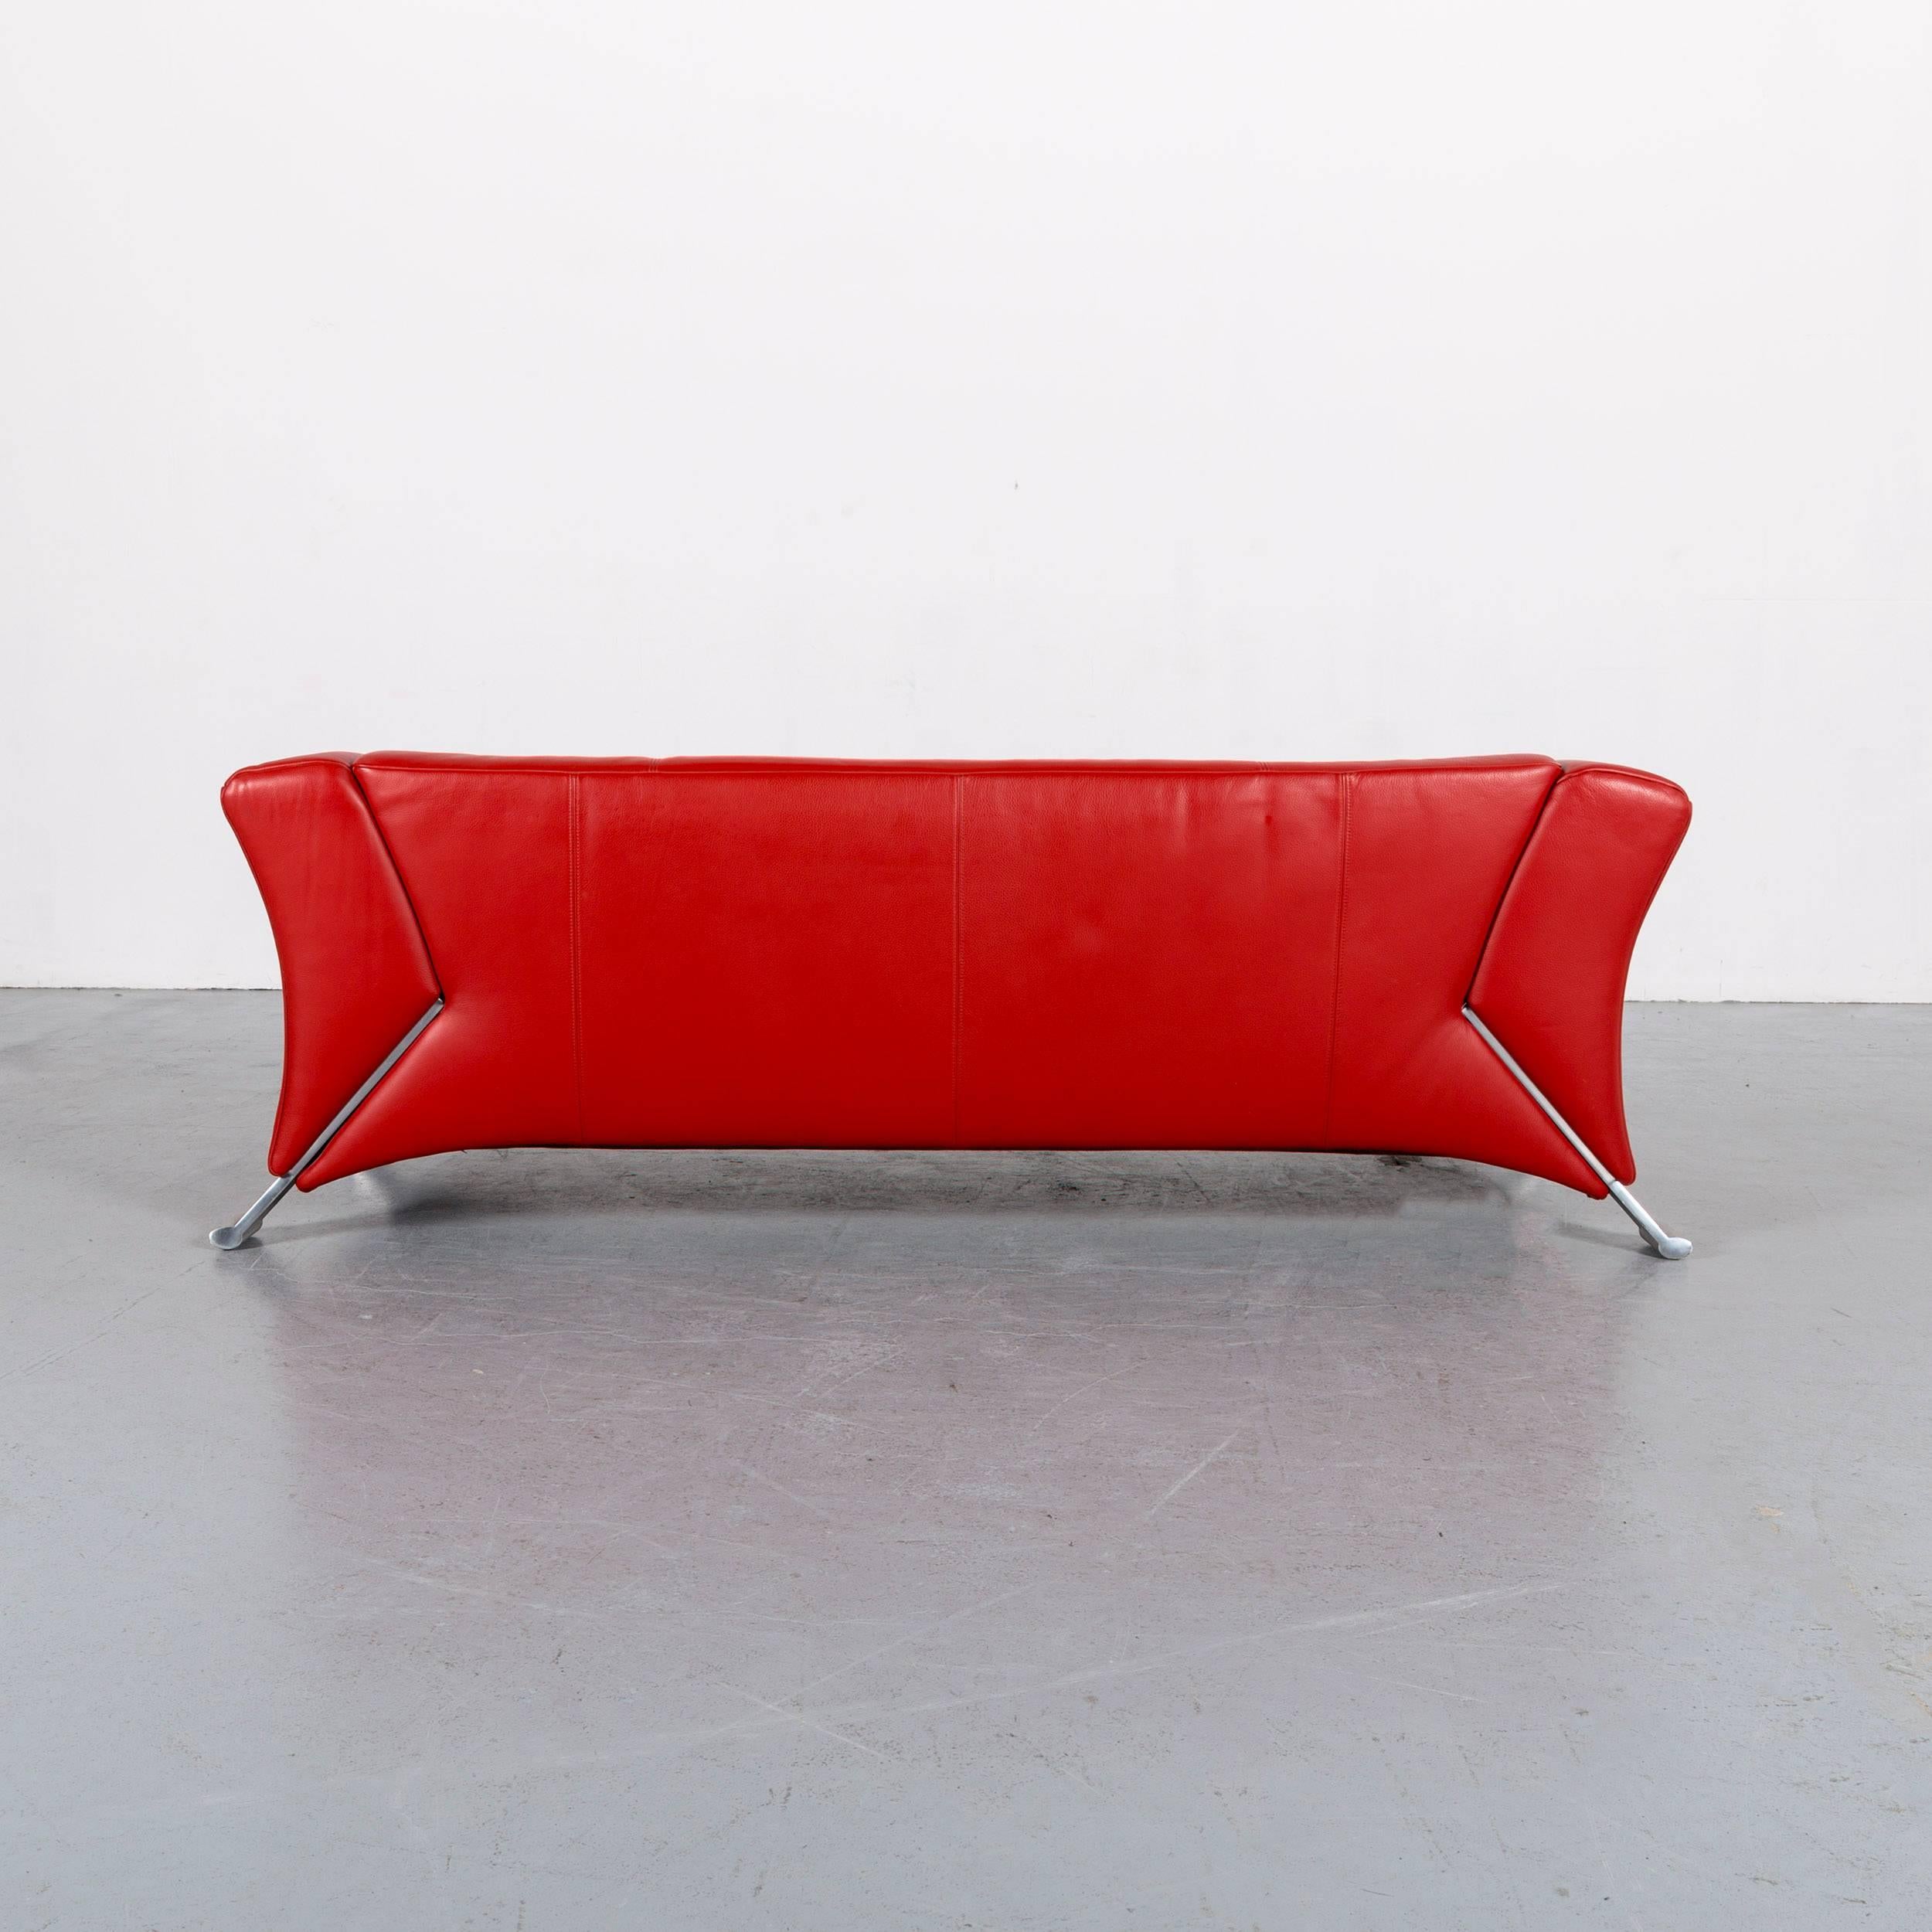 Rolf Benz 322 Designer Sofa Red Three-Seat Leather Modern Couch Metal Feet 4